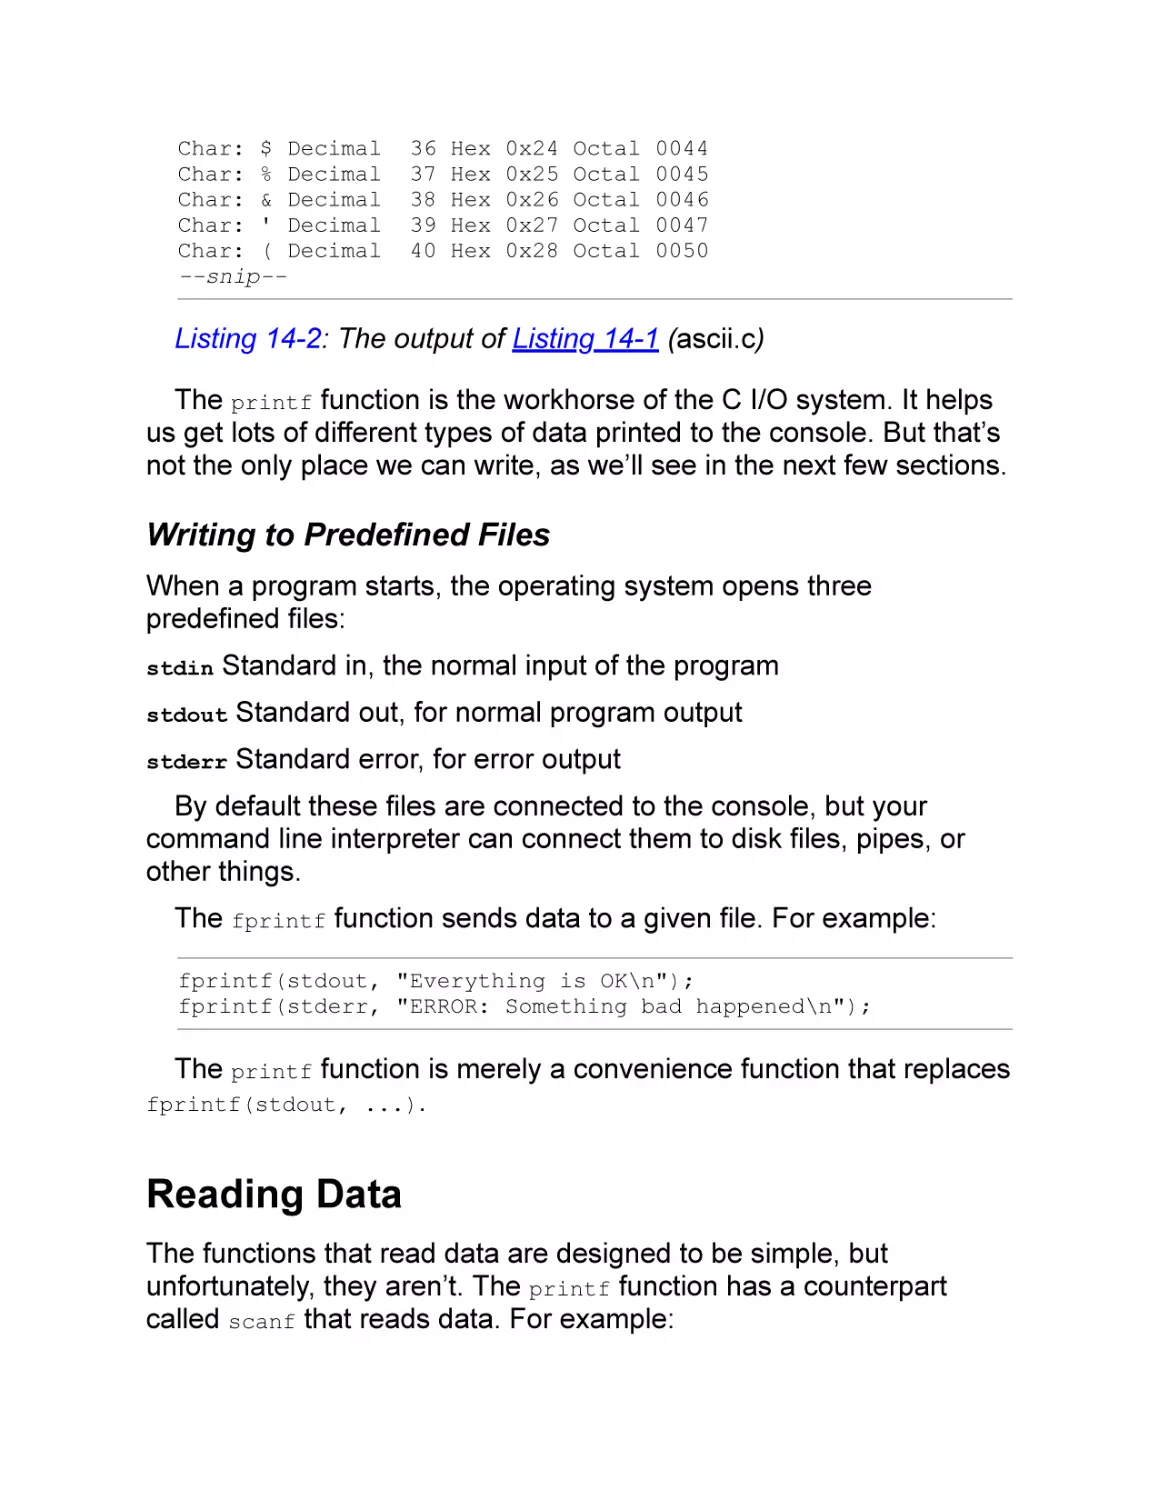 Writing to Predefined Files
Reading Data